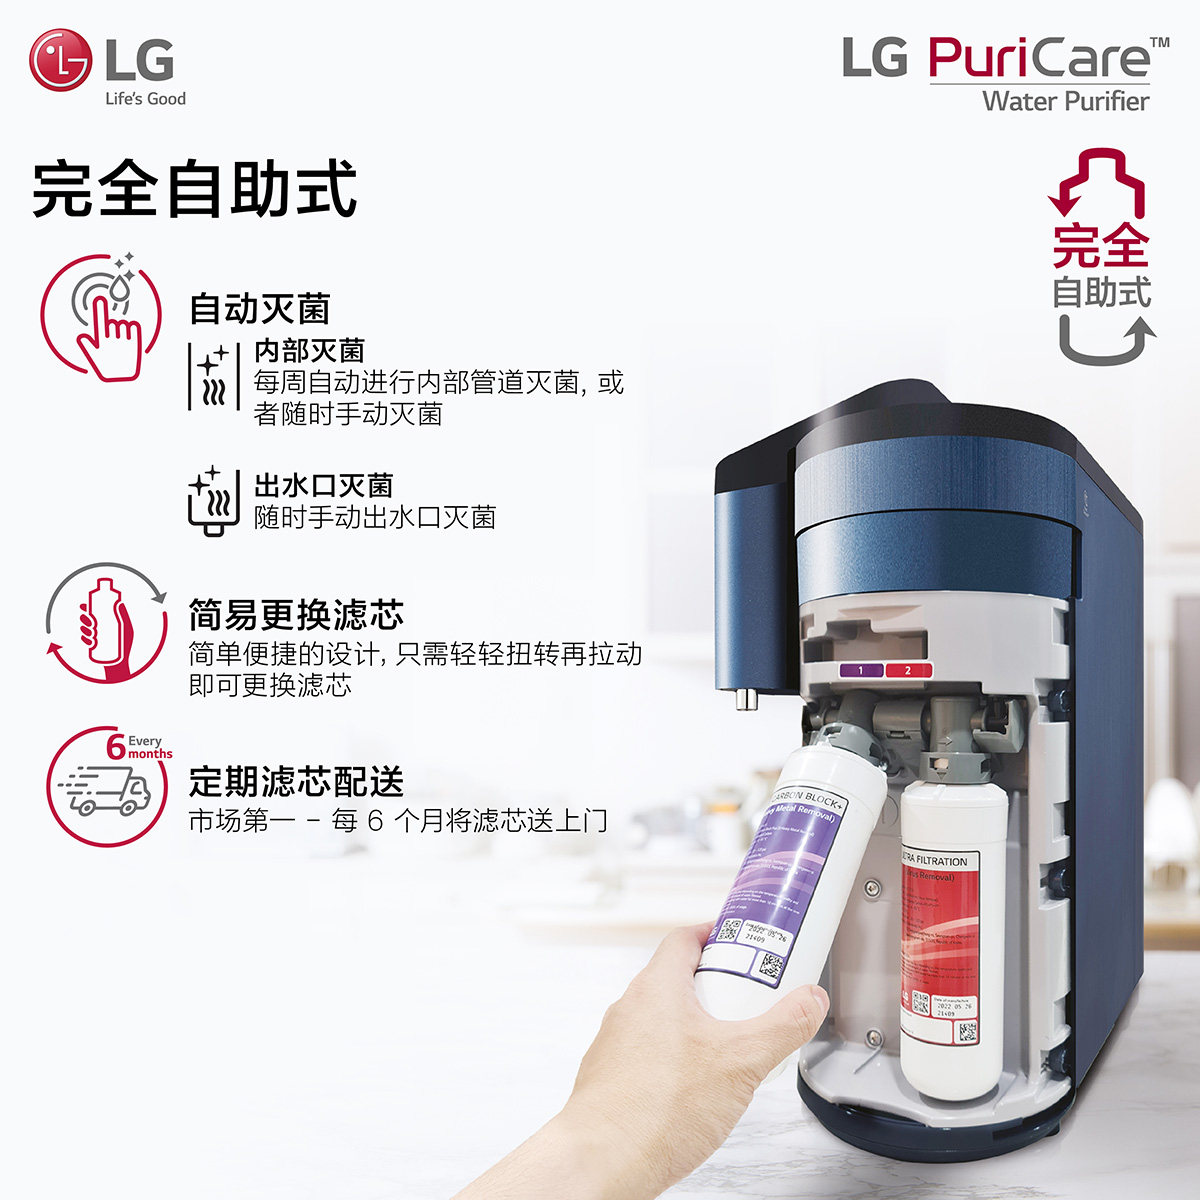 LG PuriCare Self Service Tankless Water Purifier 4